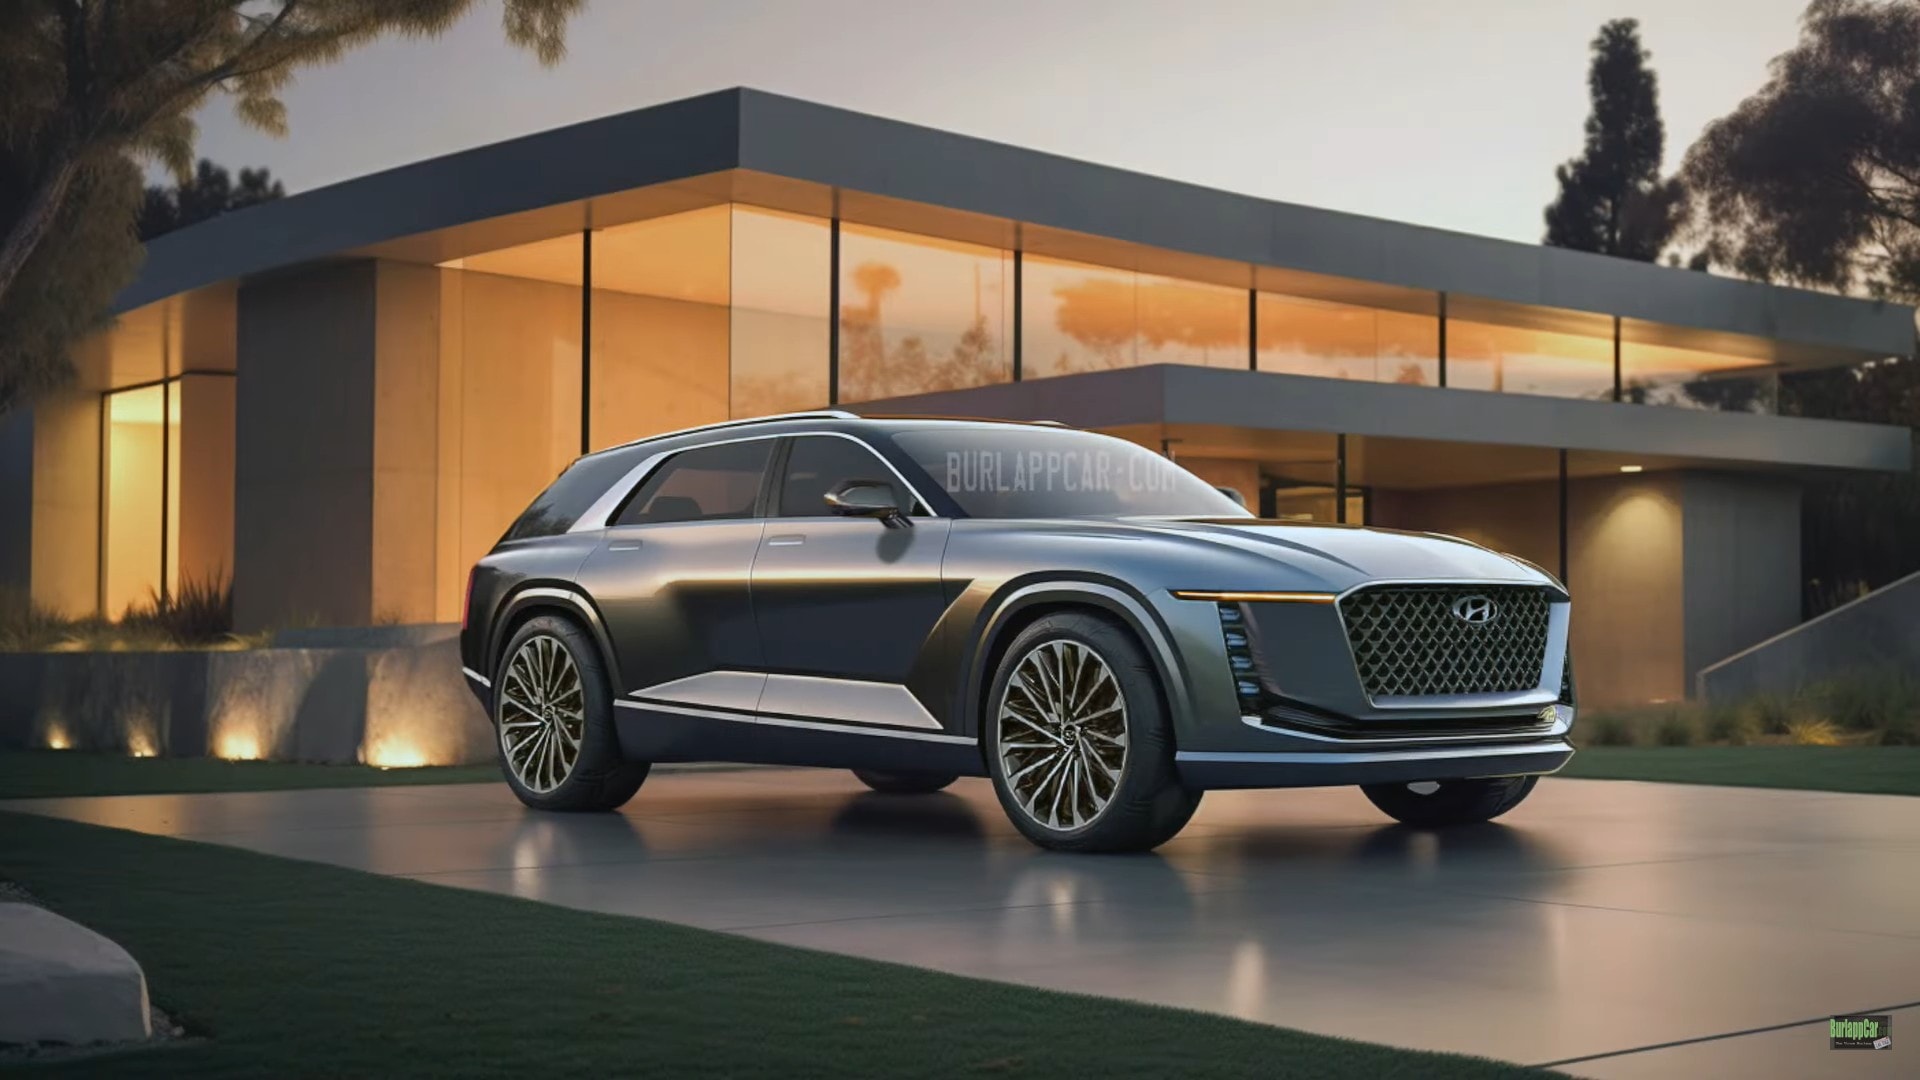 2026-hyundai-palisade-visits-imagination-land-can-t-decide-what-attire-to-wear_4.jpg